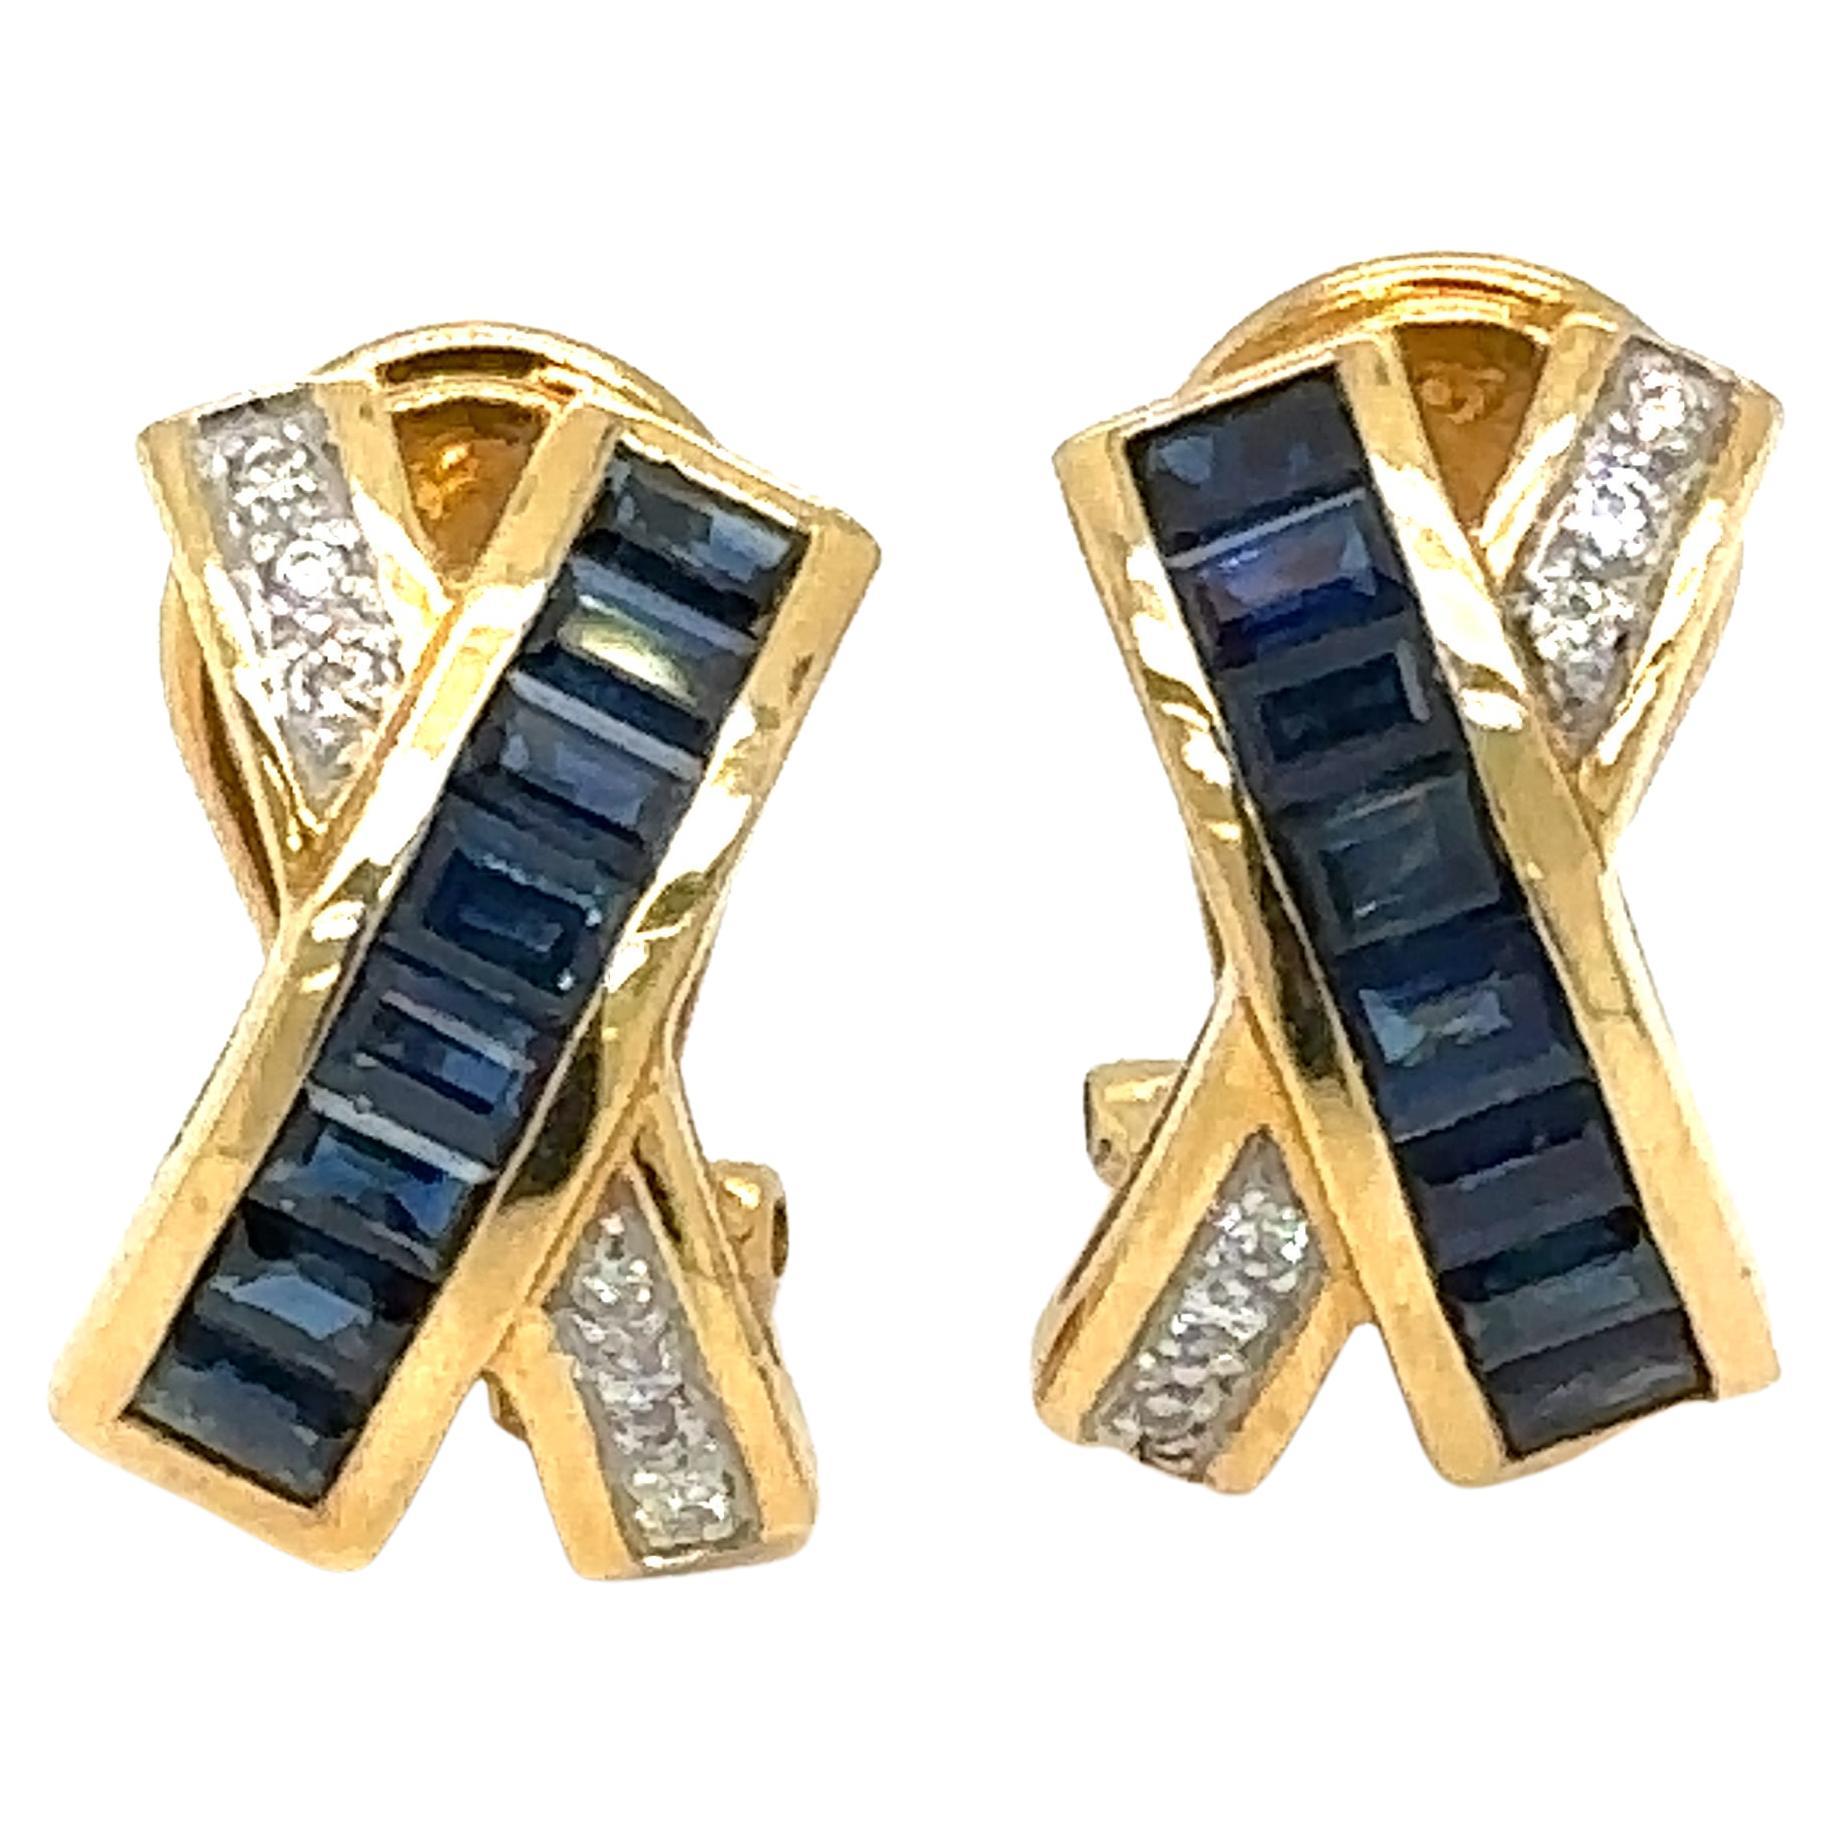 Le Vian X Style Earrings with Sapphires and Diamonds in 18 Karat Yellow Gold